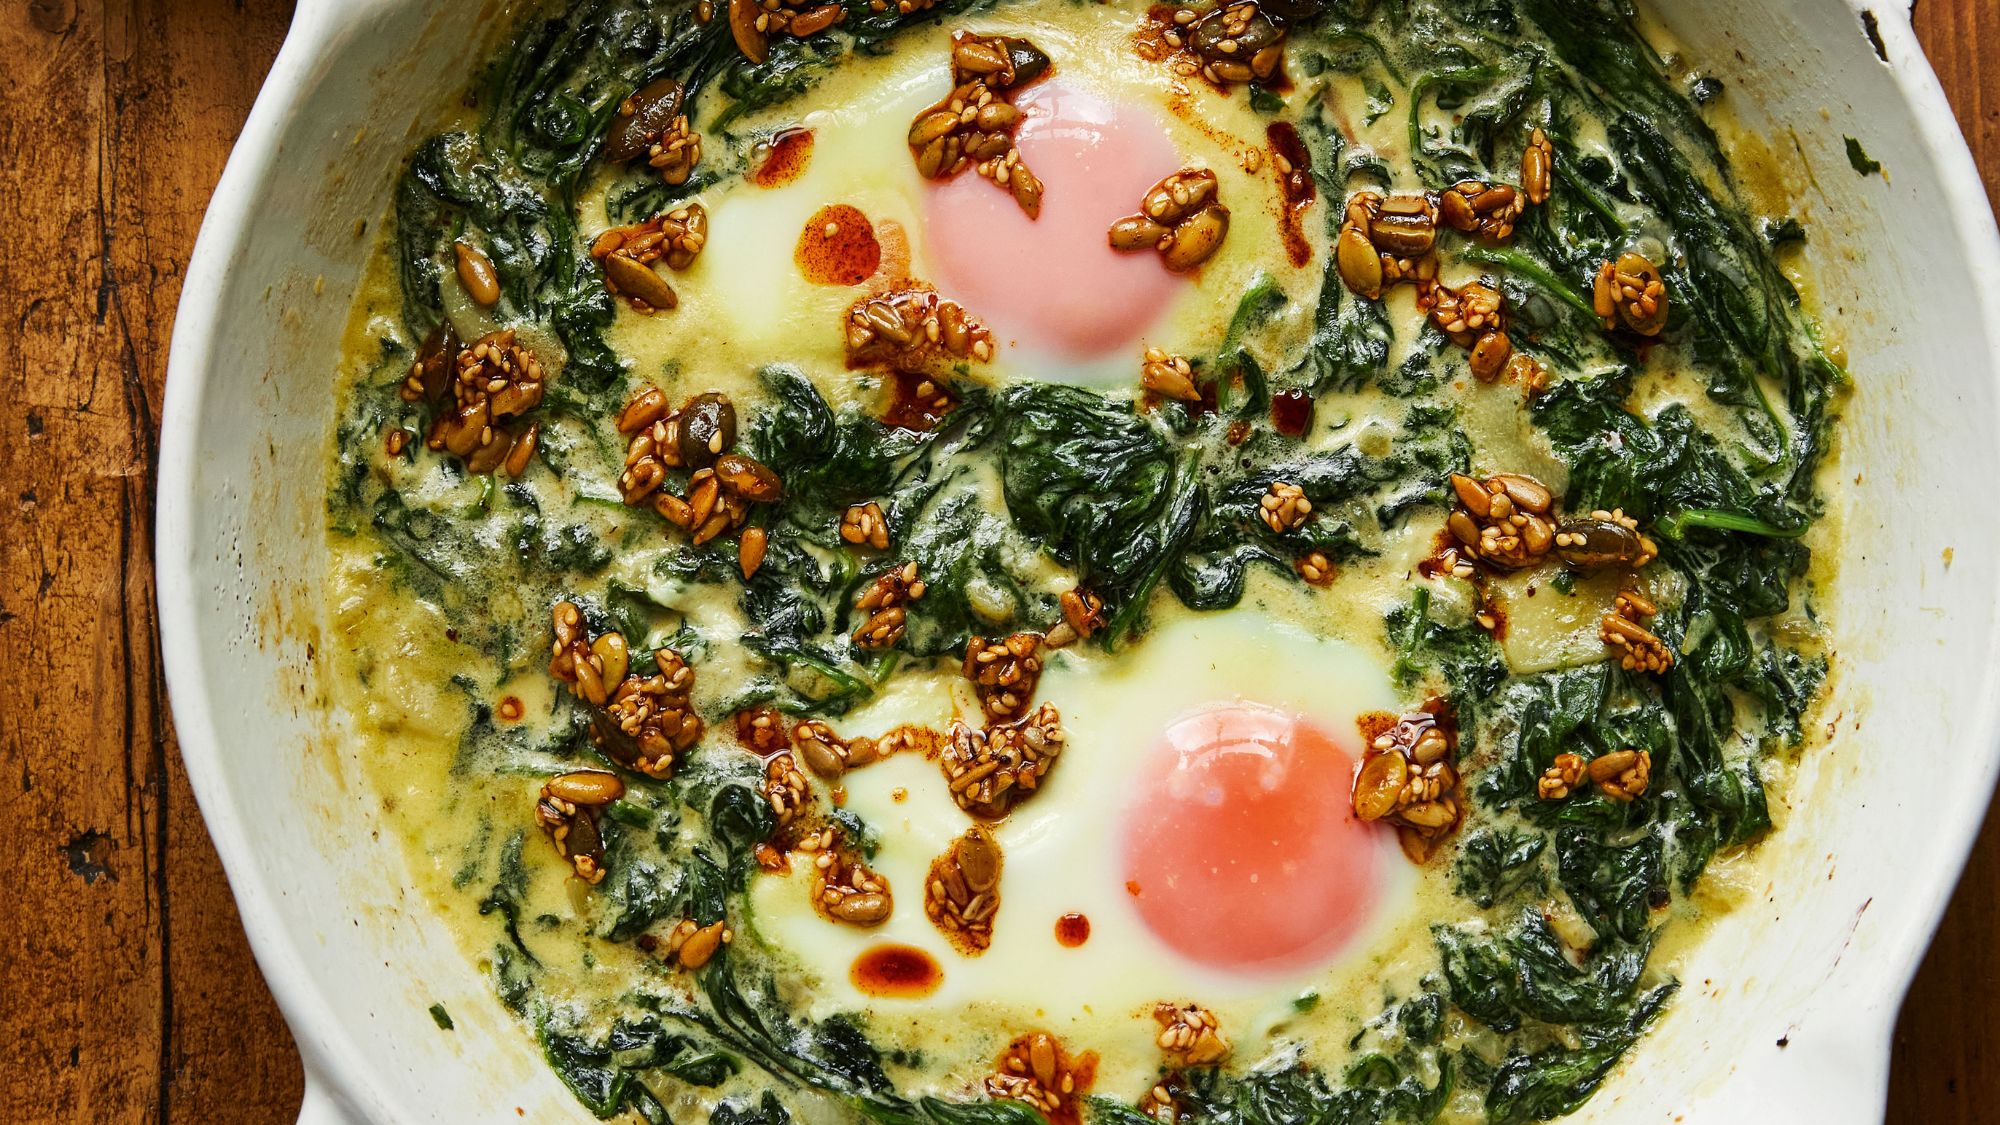  Eggs in creamed spinach with spiced butter seeds recipe 